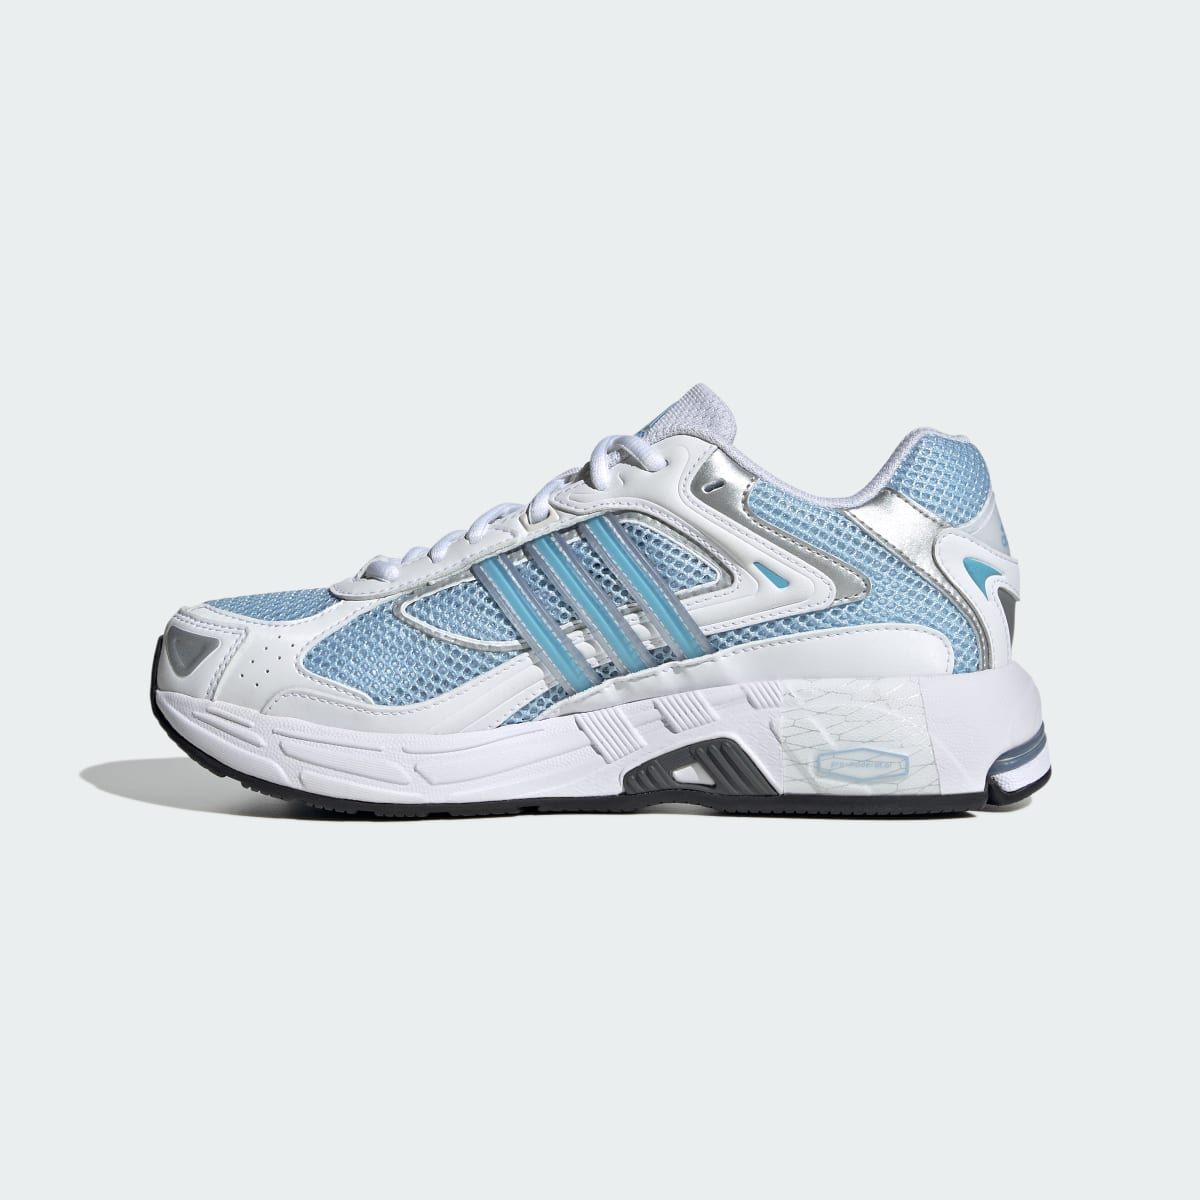 Adidas Chaussure Response CL. 7